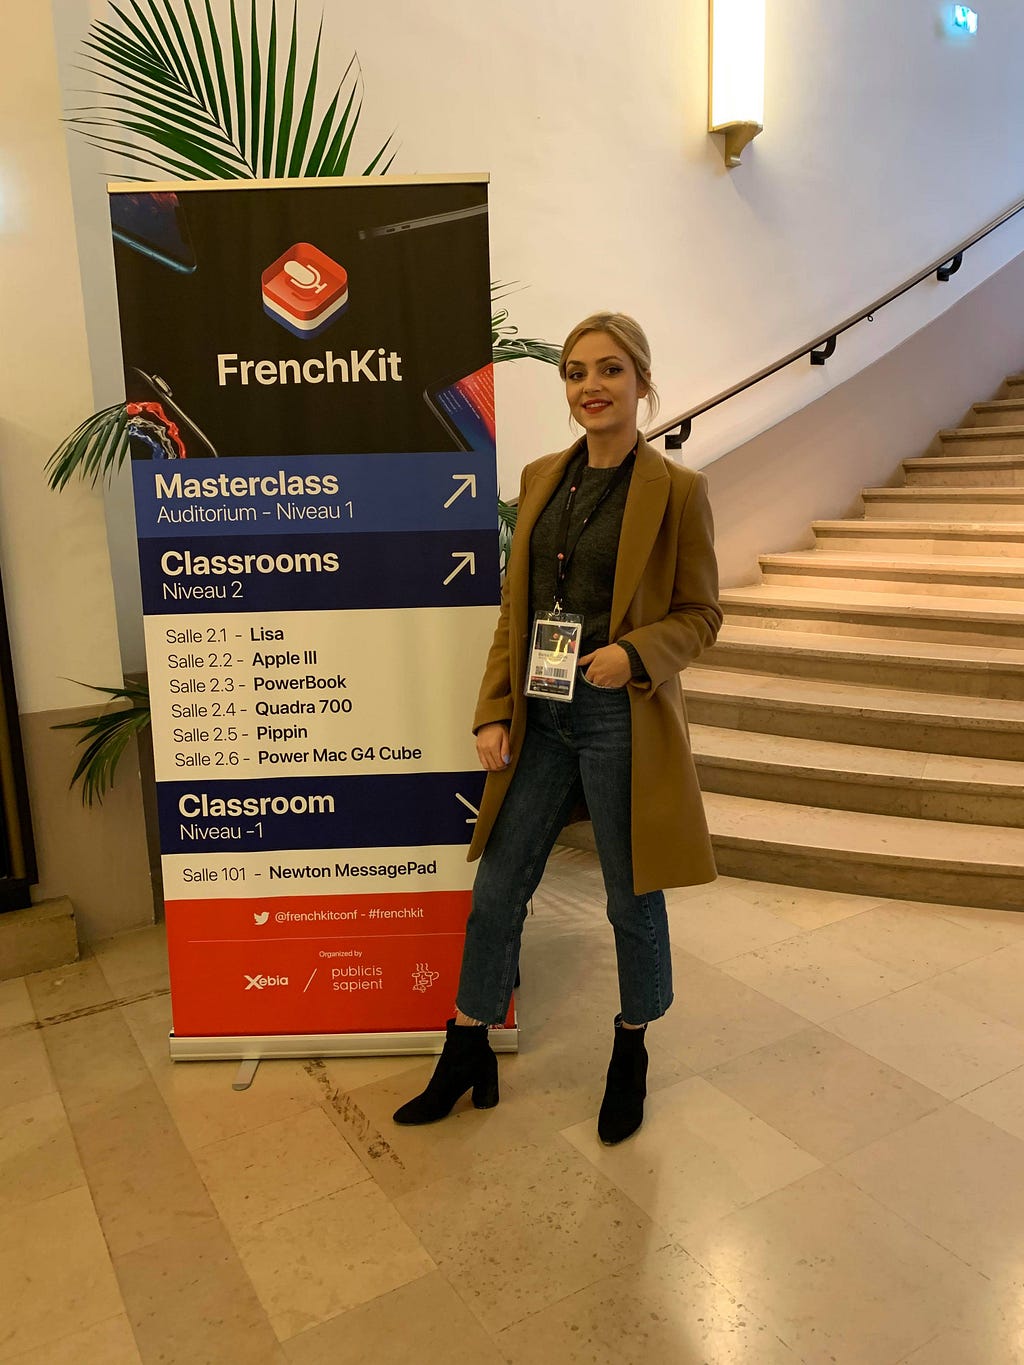 Wolfpack Digital supports iOS experts at tech conferences like FrenchIT in Paris